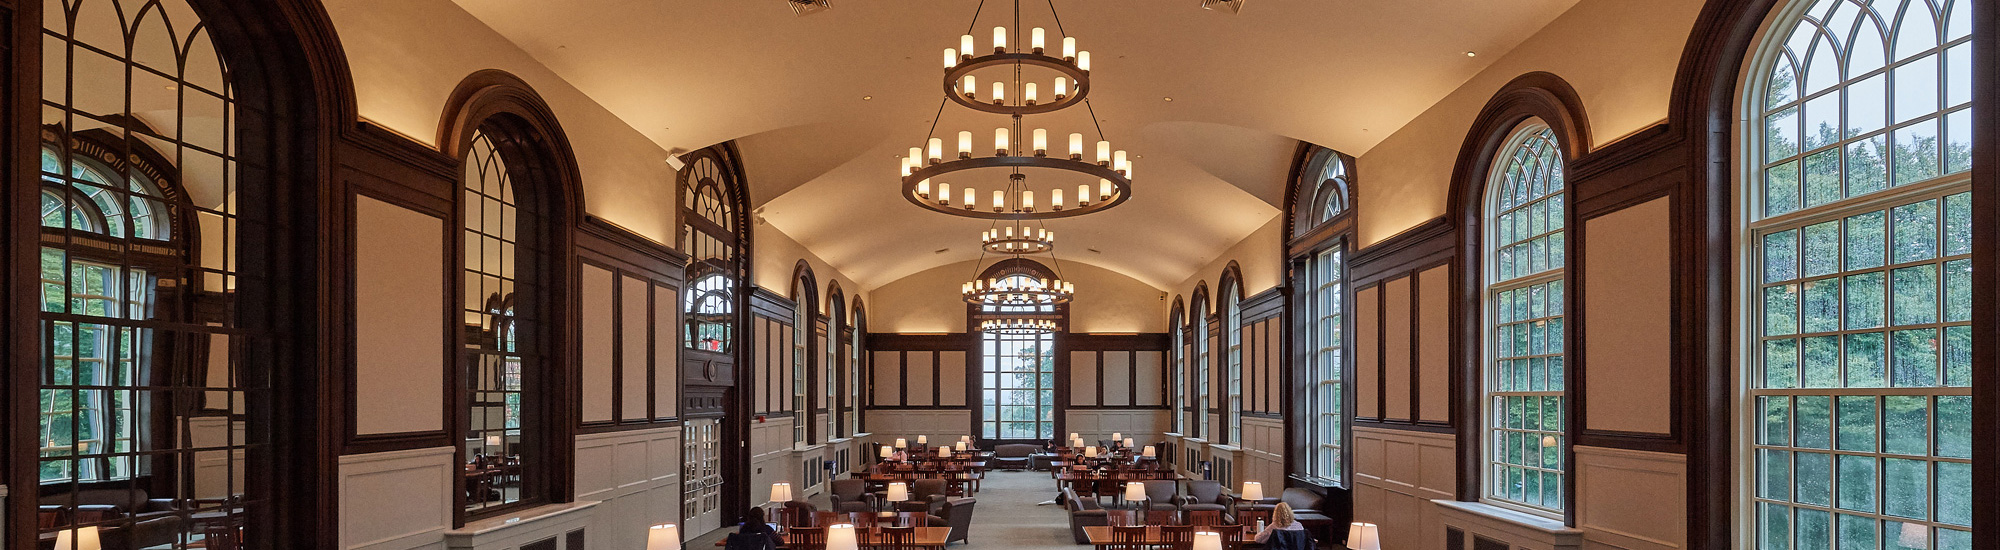 A view of the renovated south reading room at the Wilbur Cross Building